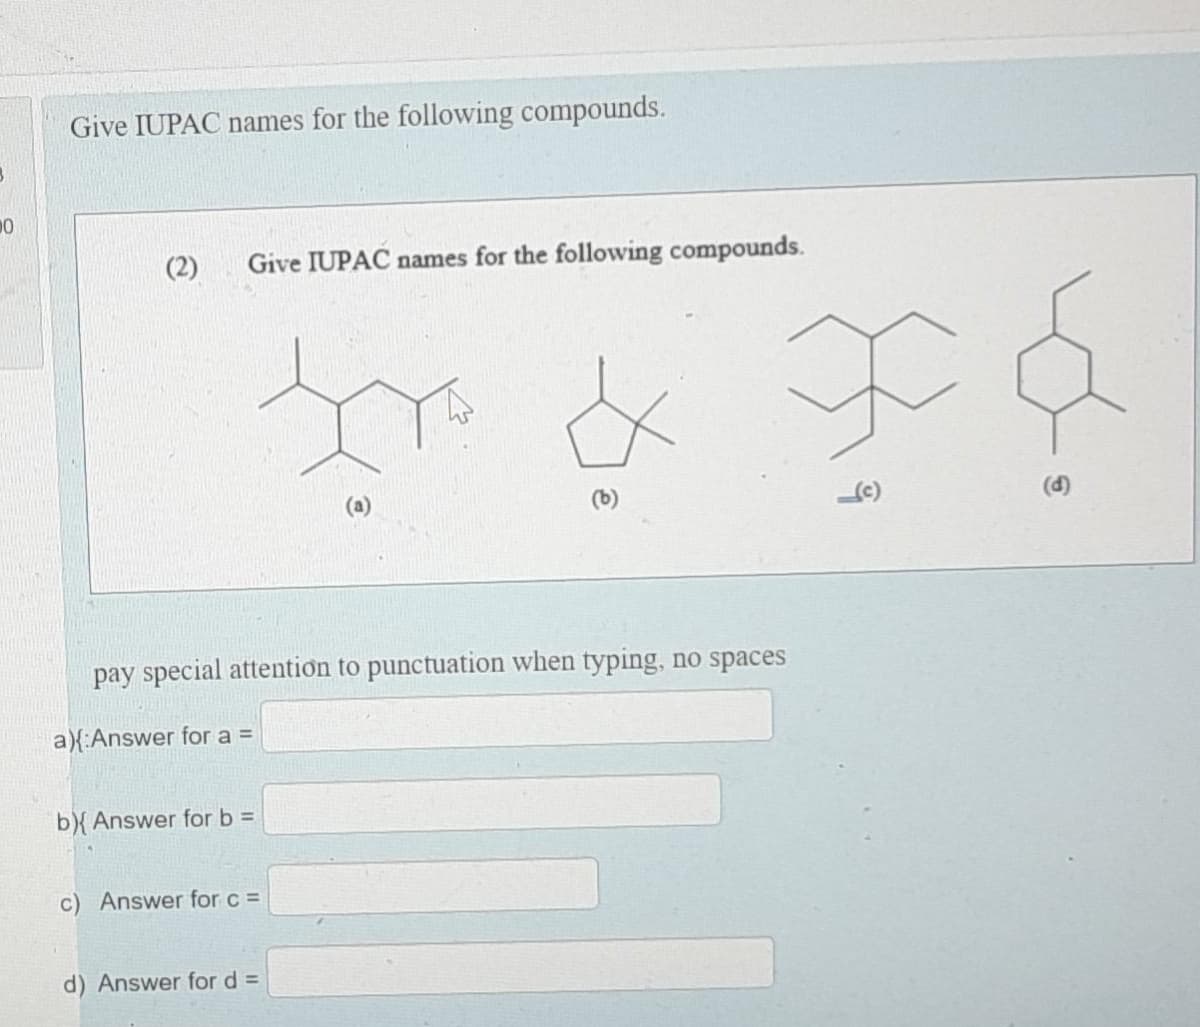 20
Give IUPAC names for the following compounds.
(2) Give IUPAC names for the following compounds.
pay special attention to punctuation when typing, no spaces
a){ Answer for a =
b){ Answer for b =
c) Answer for c =
d) Answer for d =